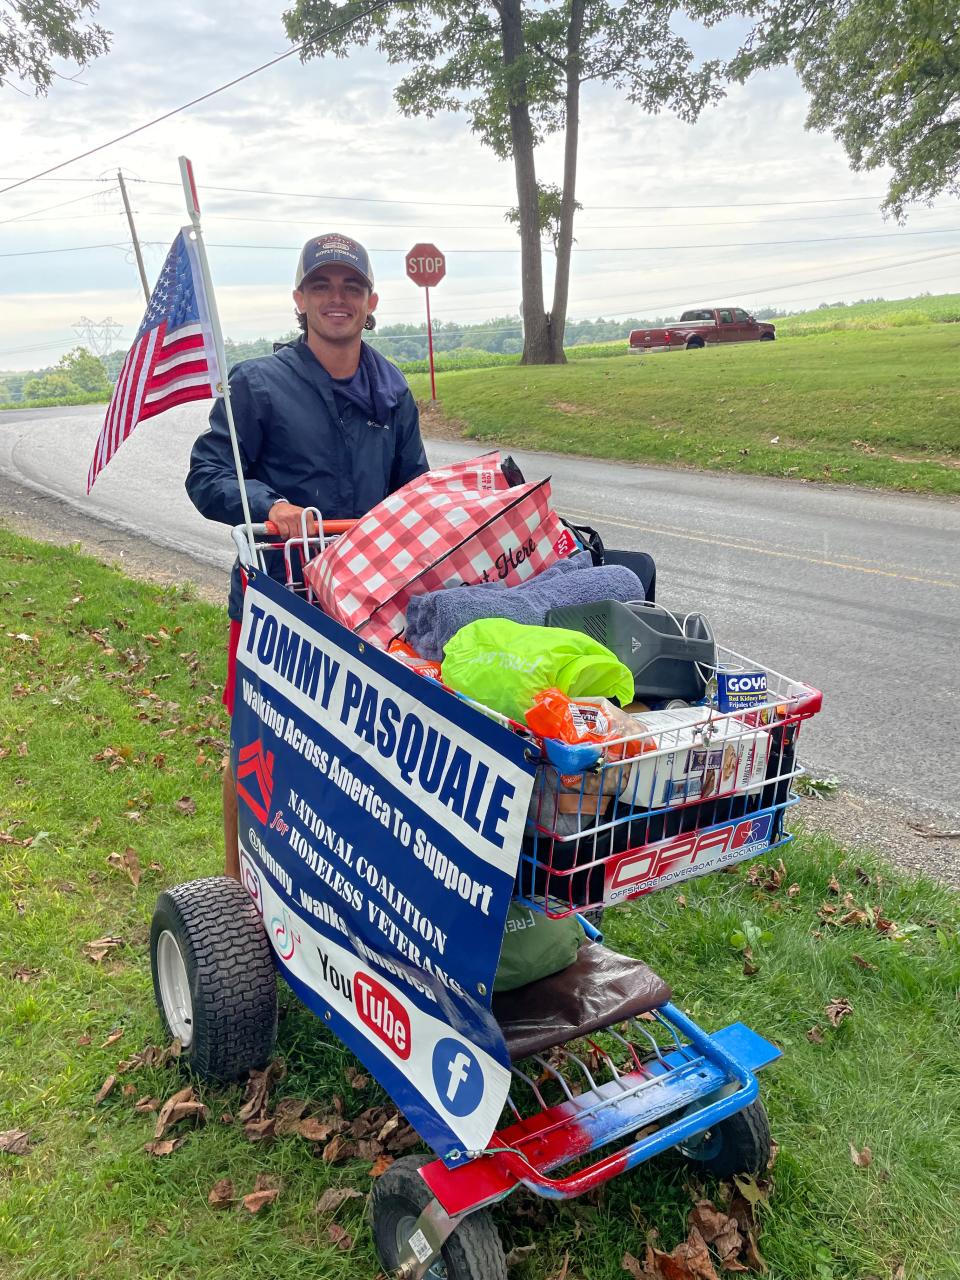 Randolph native Tommy Pasquale is pushing a shopping cart 3,000 miles across the U.S. to raise money and awareness for homeless veterans.